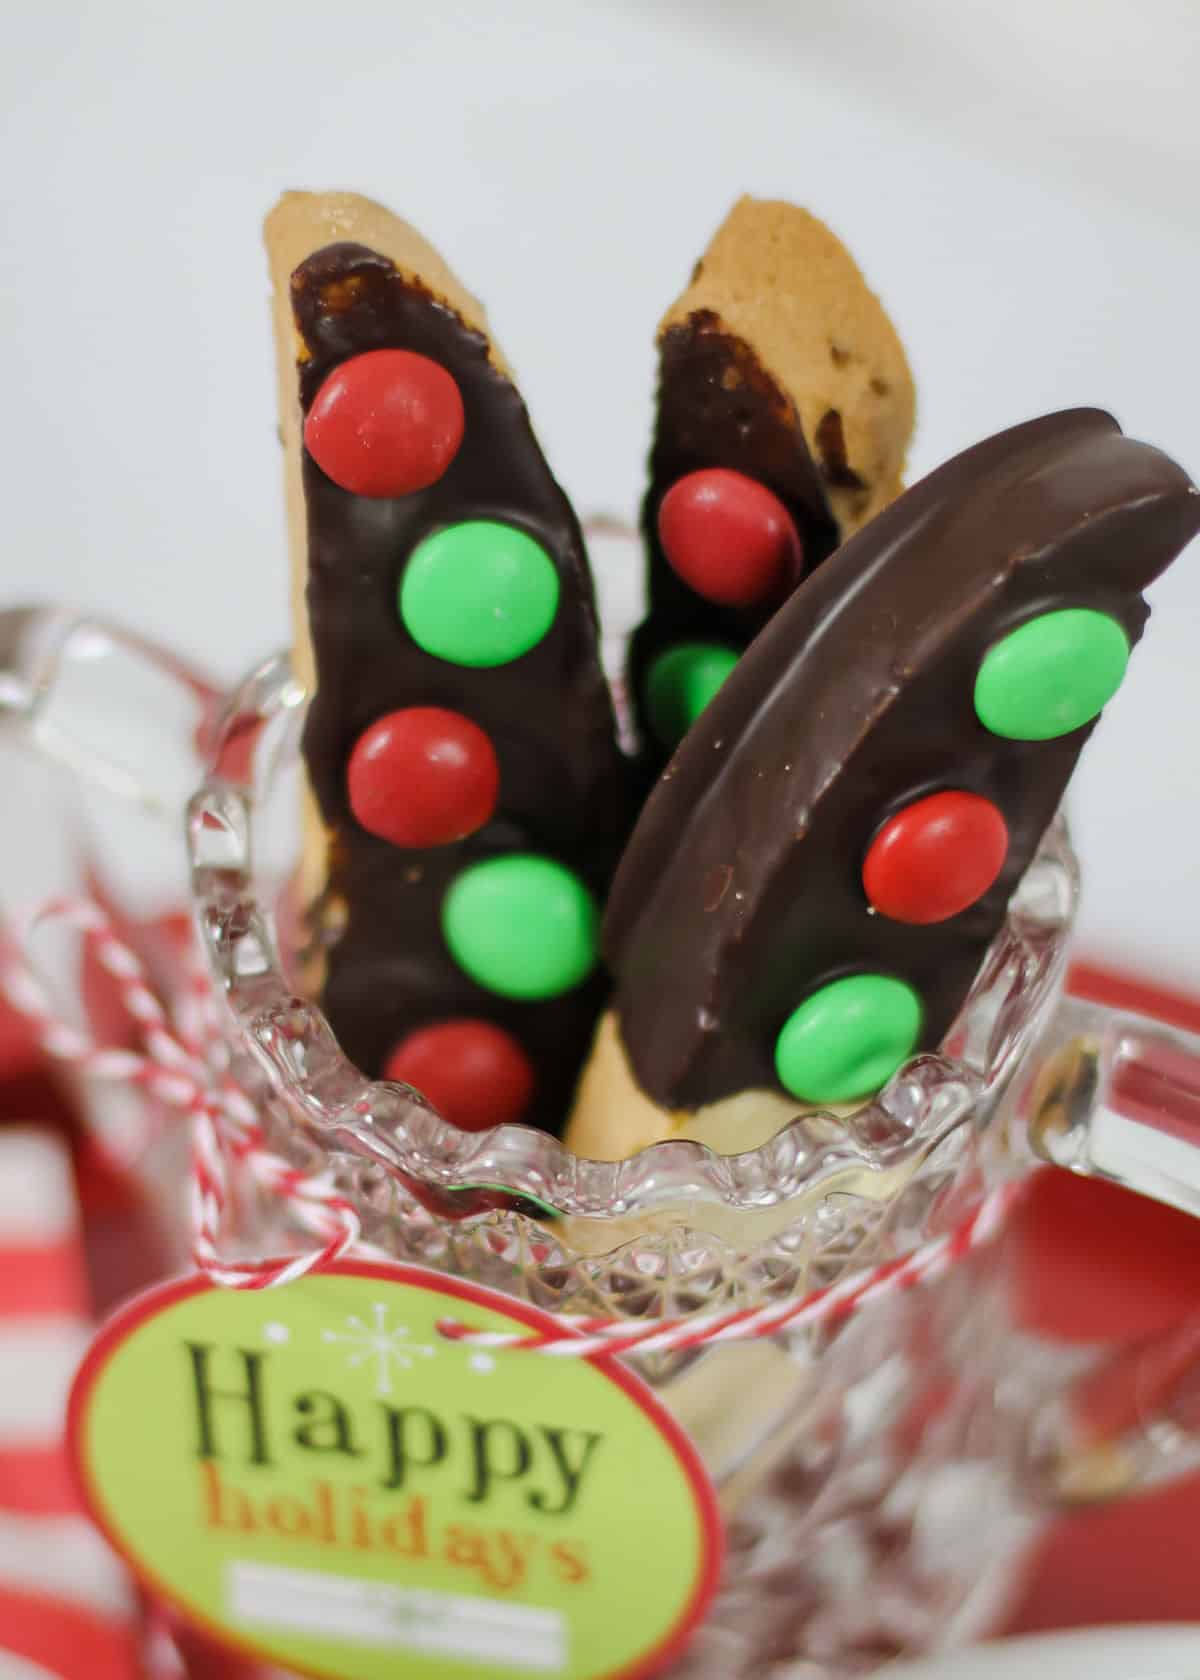 biscotti dipped in chocolate with red and green M&M's attached.